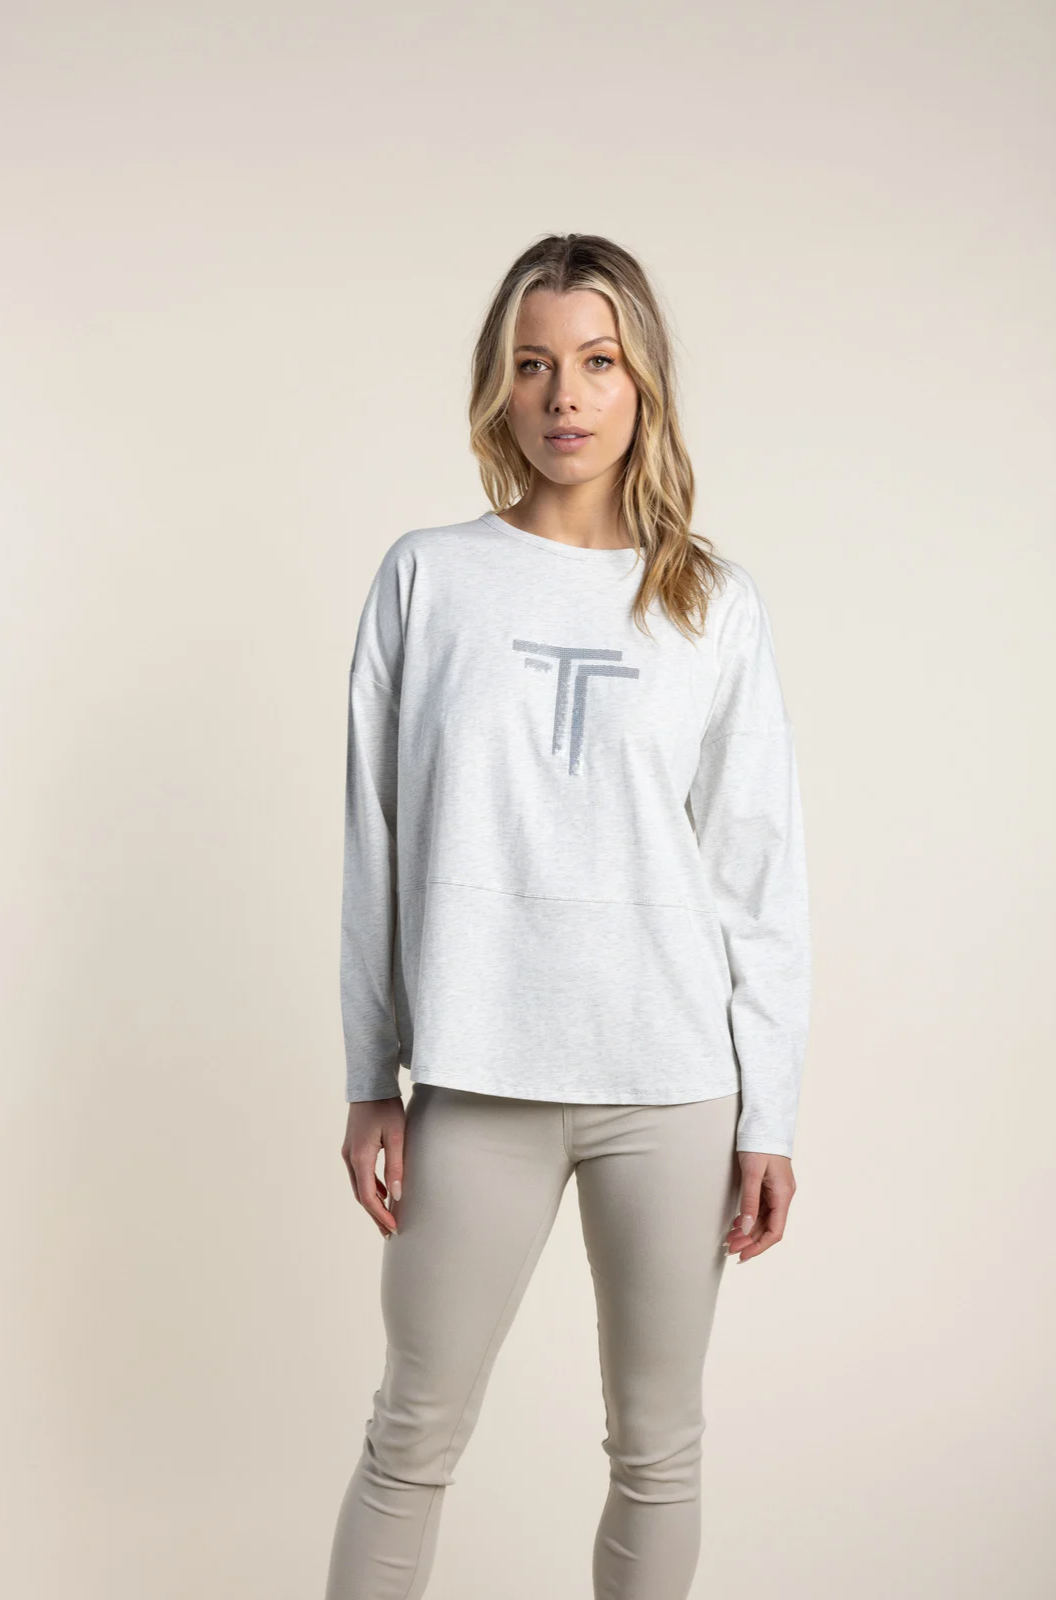 Two T's Sequin Trim Logo Tee in Grey Marle